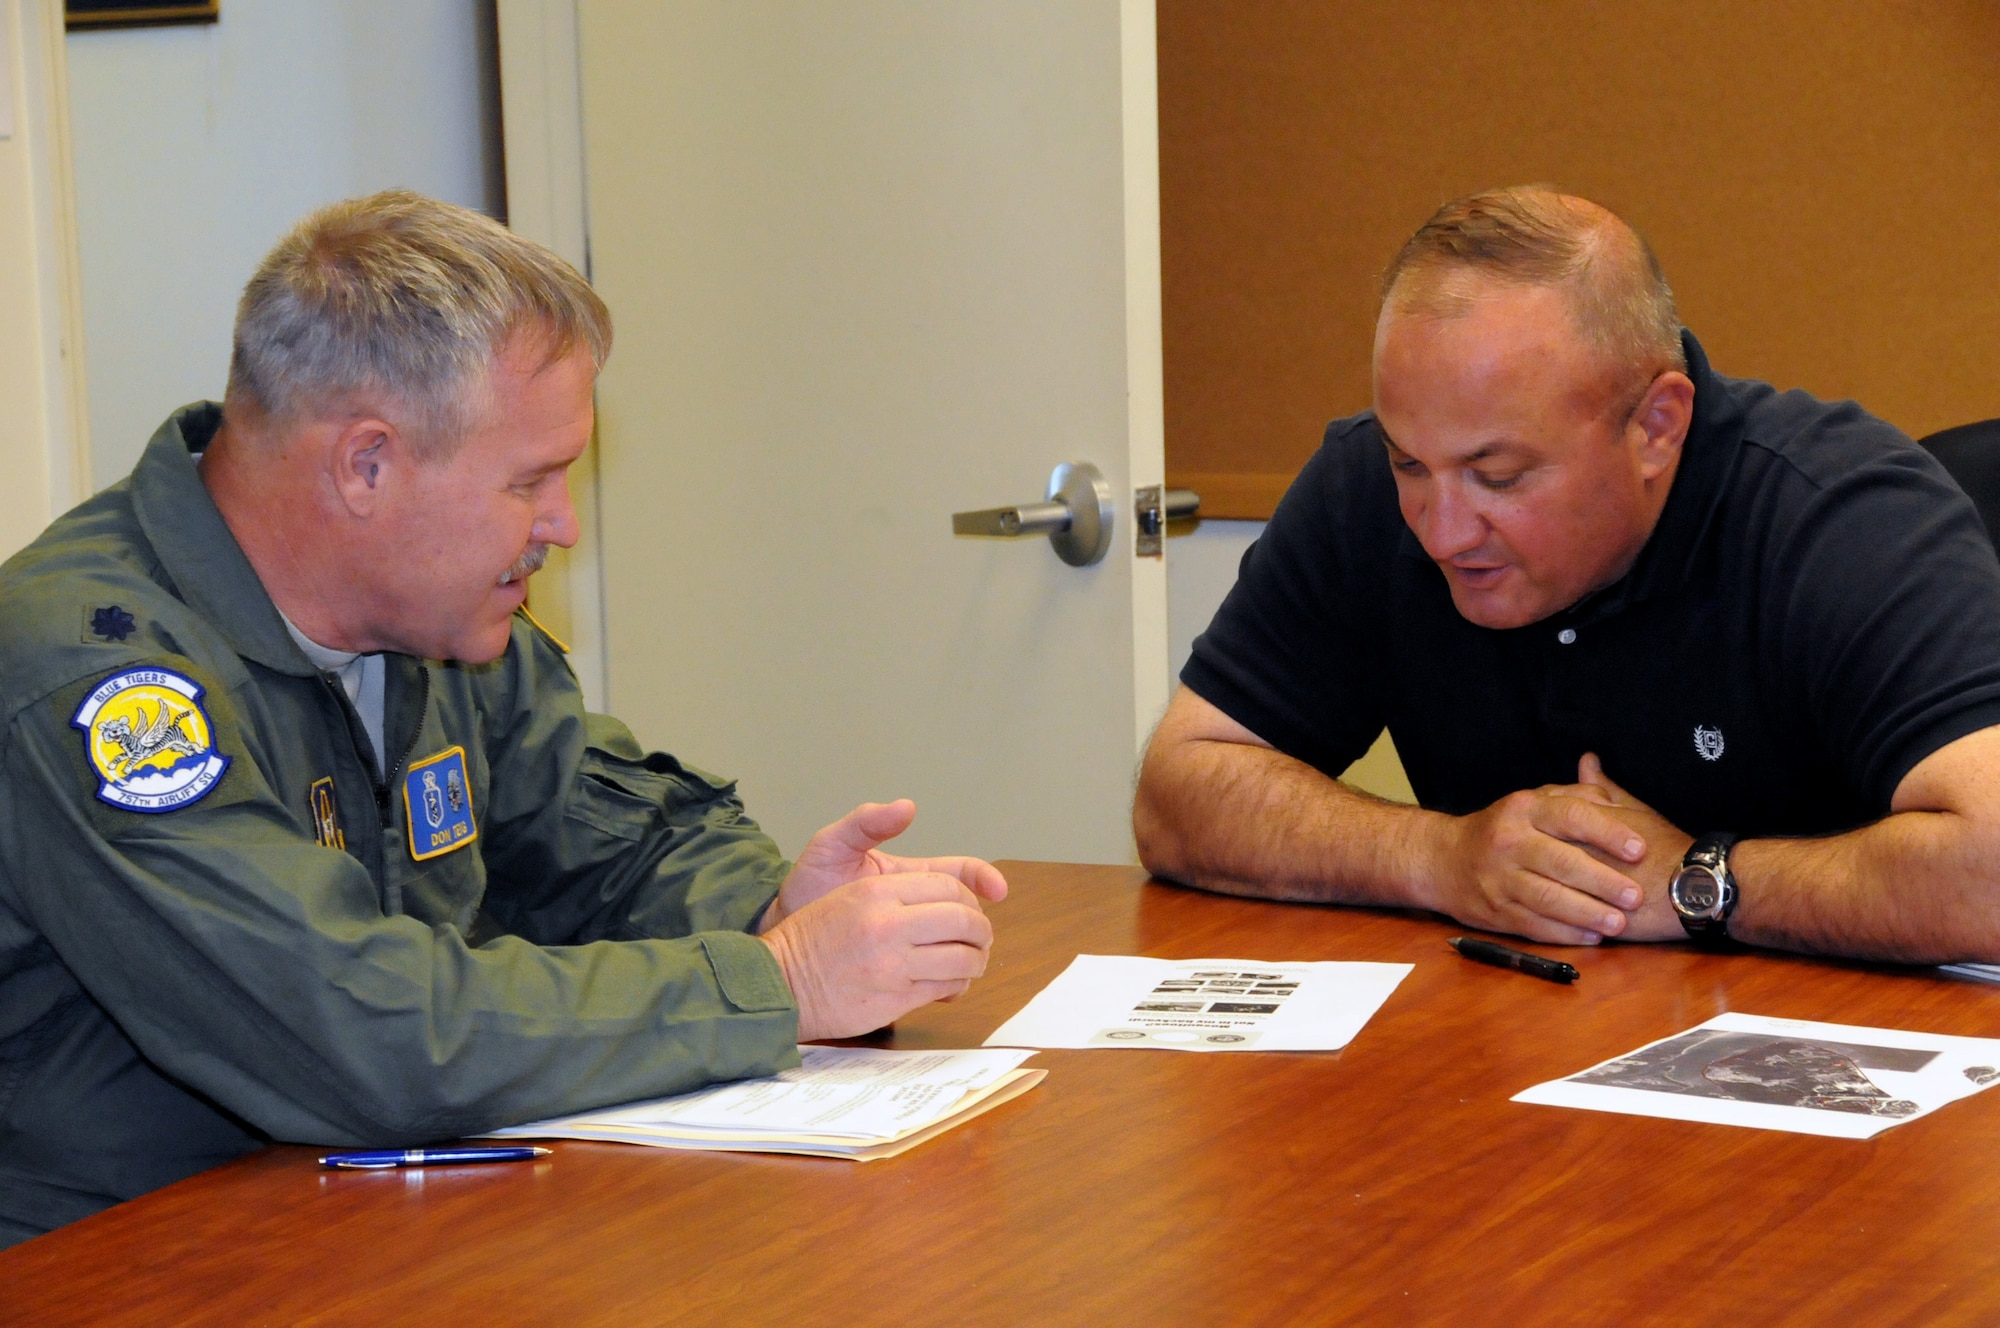 Lt. Col. Don Teig, a medical entomologist assigned to the 757th Airlift Squadron, discusses the upcoming aerial spray mission with Bill Tate, the Marine Corps Recruit Depot’s Deputy G-4 here, April 5, 2016. The aerial spray flight from Youngstown Air Reserve Station's 910th Airlift Wing came to spray noseeums,  small blood-sucking gnats, which are a major nuisance in the area. The mission is a nighttime aerial spray which has been found to be the most effective way to target the noseeums. Last year’s missions showed a control rate between 90 and 100 percent; 80 percent is considered successful mission.  (U.S. Air Force photo/ Tech. Sgt. Rick Lisum)